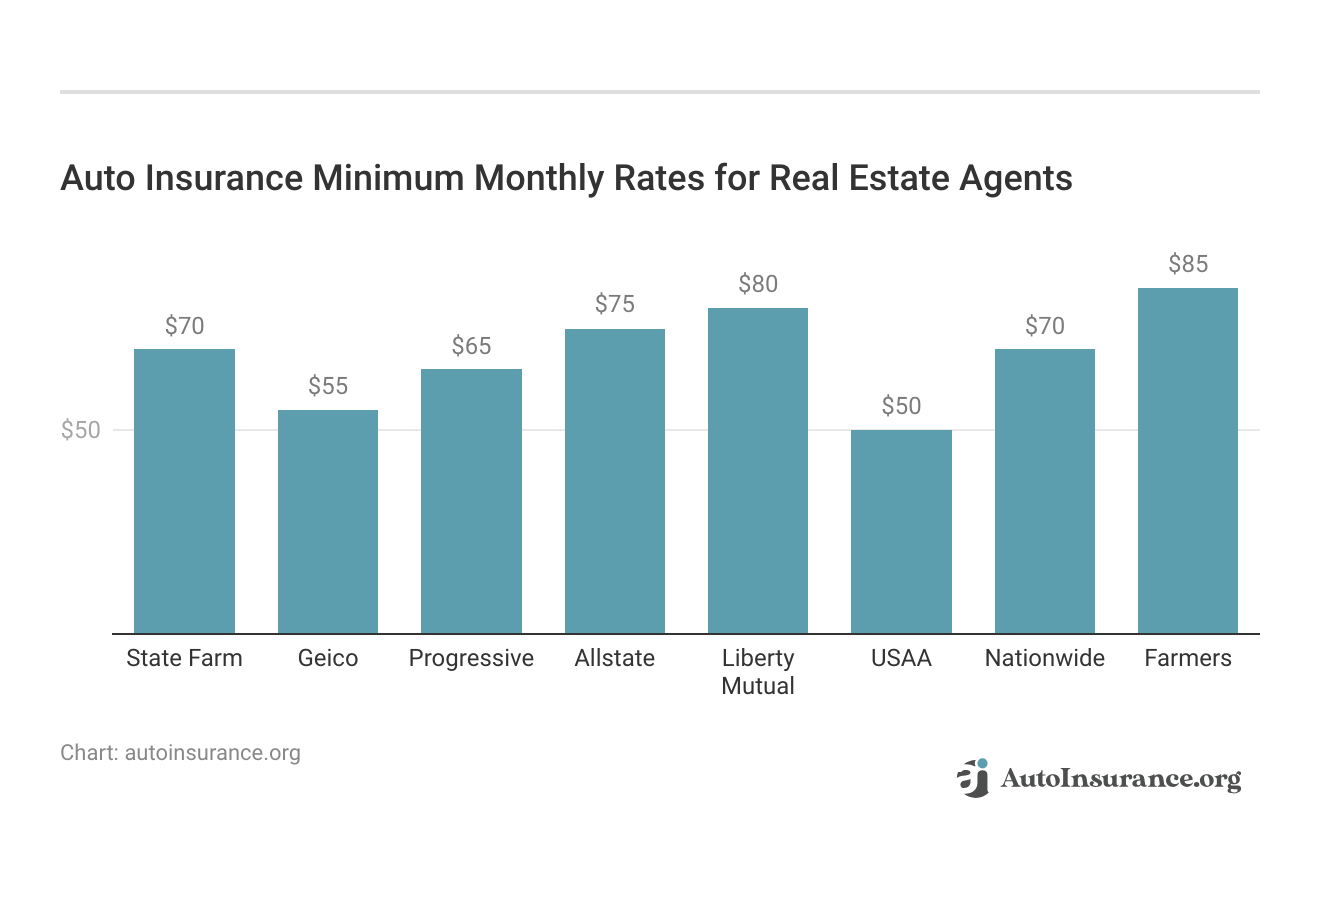 <h3>Auto Insurance Minimum Monthly Rates for Real Estate Agents</h3>